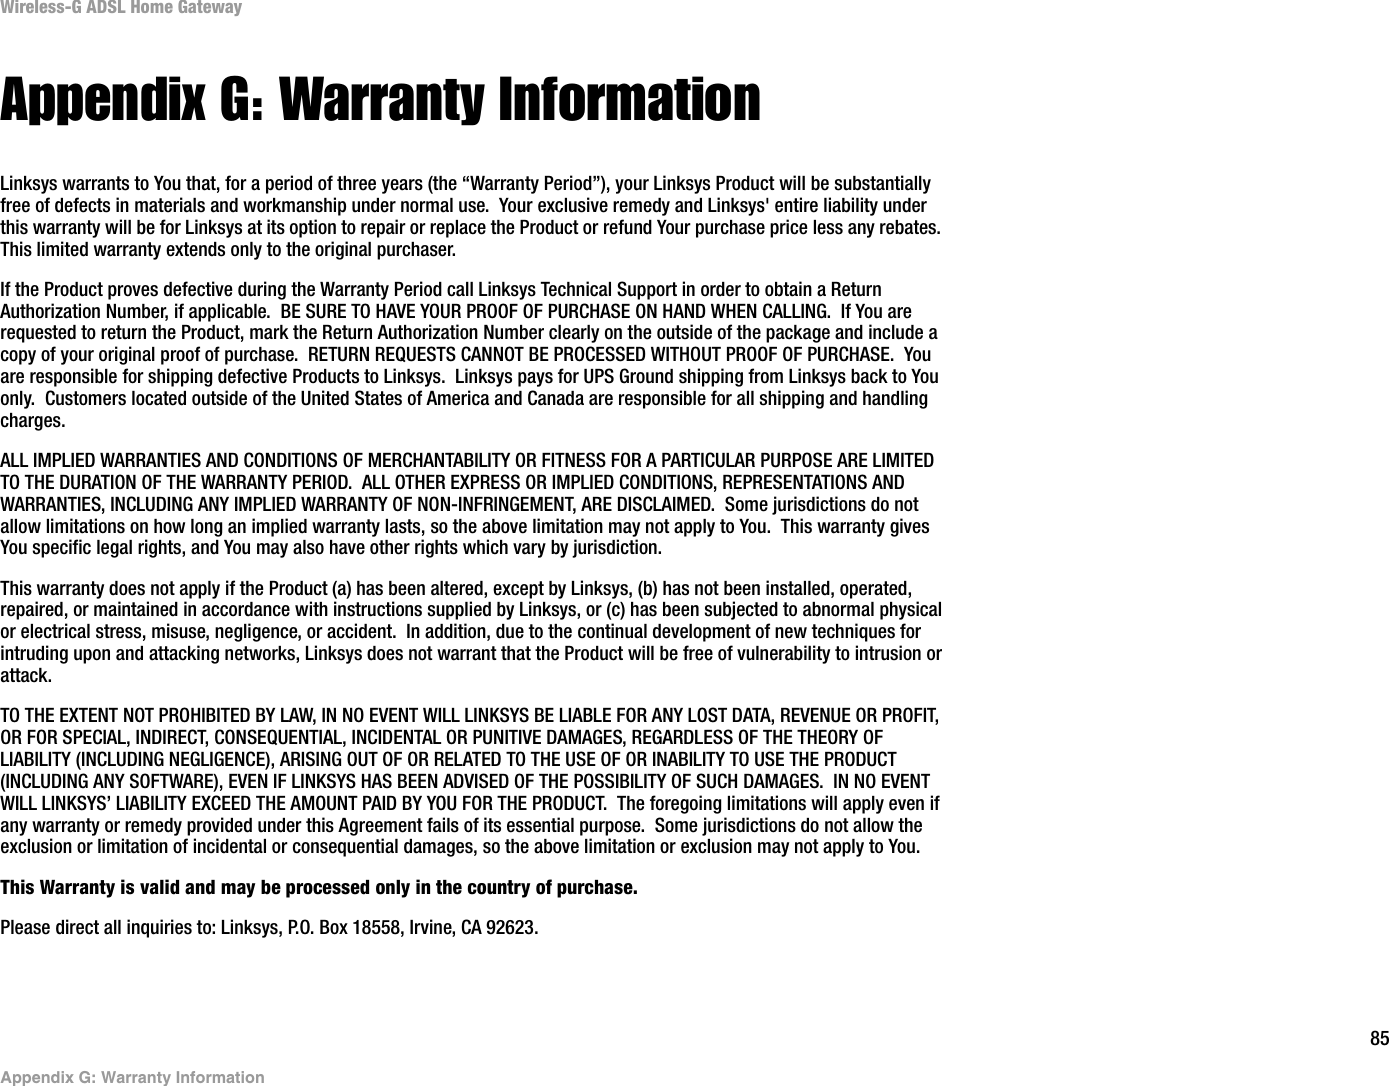 85Appendix G: Warranty InformationWireless-G ADSL Home GatewayAppendix G: Warranty InformationLinksys warrants to You that, for a period of three years (the “Warranty Period”), your Linksys Product will be substantially free of defects in materials and workmanship under normal use.  Your exclusive remedy and Linksys&apos; entire liability under this warranty will be for Linksys at its option to repair or replace the Product or refund Your purchase price less any rebates.This limited warranty extends only to the original purchaser.  If the Product proves defective during the Warranty Period call Linksys Technical Support in order to obtain a Return Authorization Number, if applicable.  BE SURE TO HAVE YOUR PROOF OF PURCHASE ON HAND WHEN CALLING.  If You are requested to return the Product, mark the Return Authorization Number clearly on the outside of the package and include a copy of your original proof of purchase.  RETURN REQUESTS CANNOT BE PROCESSED WITHOUT PROOF OF PURCHASE.  You are responsible for shipping defective Products to Linksys.  Linksys pays for UPS Ground shipping from Linksys back to You only.  Customers located outside of the United States of America and Canada are responsible for all shipping and handling charges. ALL IMPLIED WARRANTIES AND CONDITIONS OF MERCHANTABILITY OR FITNESS FOR A PARTICULAR PURPOSE ARE LIMITED TO THE DURATION OF THE WARRANTY PERIOD.  ALL OTHER EXPRESS OR IMPLIED CONDITIONS, REPRESENTATIONS AND WARRANTIES, INCLUDING ANY IMPLIED WARRANTY OF NON-INFRINGEMENT, ARE DISCLAIMED.  Some jurisdictions do not allow limitations on how long an implied warranty lasts, so the above limitation may not apply to You.  This warranty gives You specific legal rights, and You may also have other rights which vary by jurisdiction.This warranty does not apply if the Product (a) has been altered, except by Linksys, (b) has not been installed, operated, repaired, or maintained in accordance with instructions supplied by Linksys, or (c) has been subjected to abnormal physical or electrical stress, misuse, negligence, or accident.  In addition, due to the continual development of new techniques for intruding upon and attacking networks, Linksys does not warrant that the Product will be free of vulnerability to intrusion or attack.TO THE EXTENT NOT PROHIBITED BY LAW, IN NO EVENT WILL LINKSYS BE LIABLE FOR ANY LOST DATA, REVENUE OR PROFIT, OR FOR SPECIAL, INDIRECT, CONSEQUENTIAL, INCIDENTAL OR PUNITIVE DAMAGES, REGARDLESS OF THE THEORY OF LIABILITY (INCLUDING NEGLIGENCE), ARISING OUT OF OR RELATED TO THE USE OF OR INABILITY TO USE THE PRODUCT (INCLUDING ANY SOFTWARE), EVEN IF LINKSYS HAS BEEN ADVISED OF THE POSSIBILITY OF SUCH DAMAGES.  IN NO EVENT WILL LINKSYS’ LIABILITY EXCEED THE AMOUNT PAID BY YOU FOR THE PRODUCT.  The foregoing limitations will apply even if any warranty or remedy provided under this Agreement fails of its essential purpose.  Some jurisdictions do not allow the exclusion or limitation of incidental or consequential damages, so the above limitation or exclusion may not apply to You.This Warranty is valid and may be processed only in the country of purchase.Please direct all inquiries to: Linksys, P.O. Box 18558, Irvine, CA 92623.